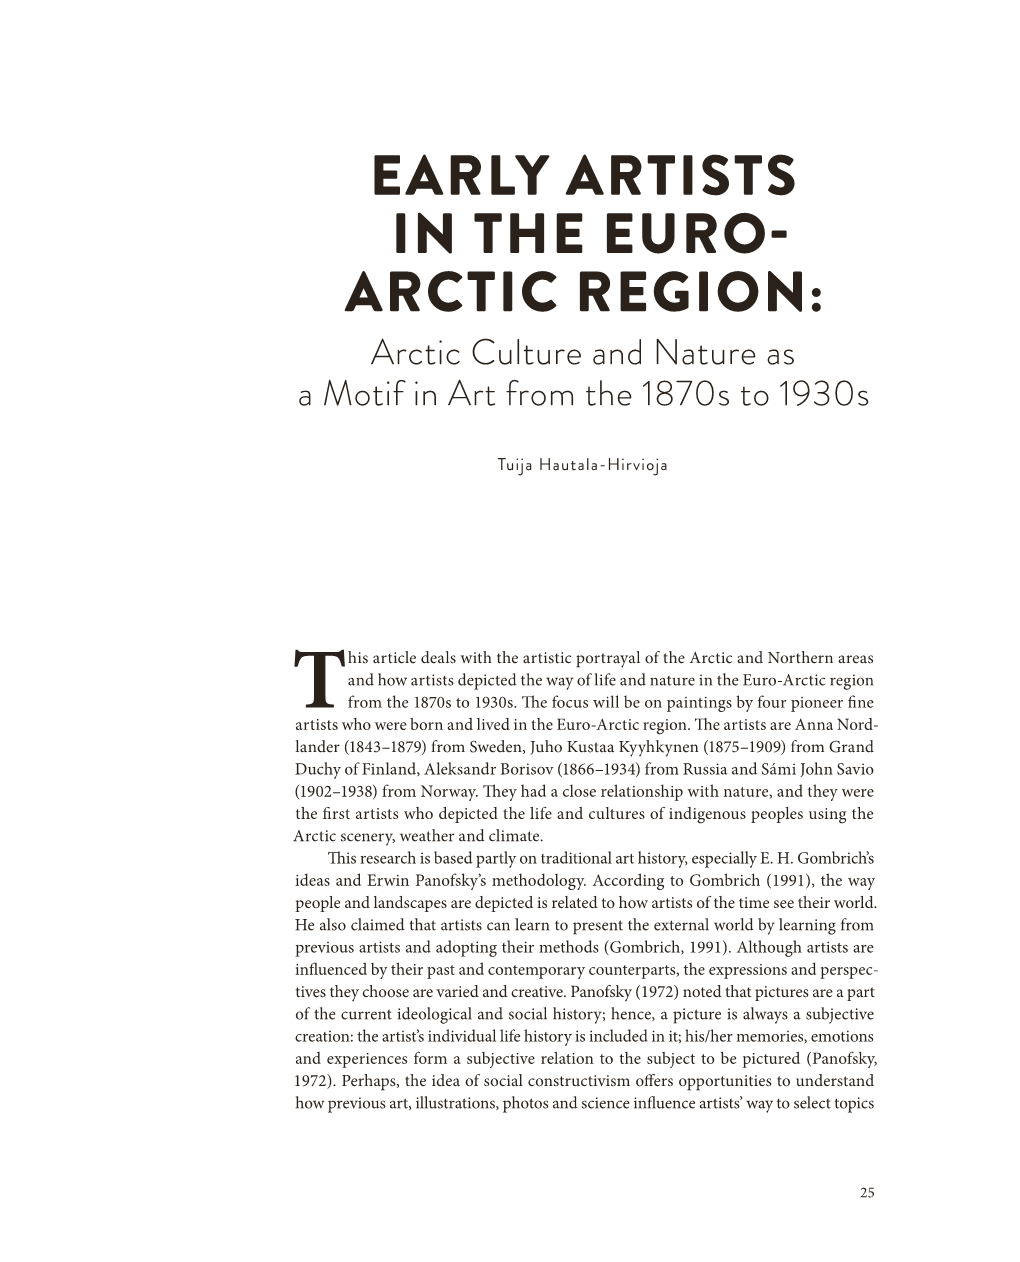 ARCTIC REGION: Arctic Culture and Nature As a Motif in Art from the 1870S to 1930S